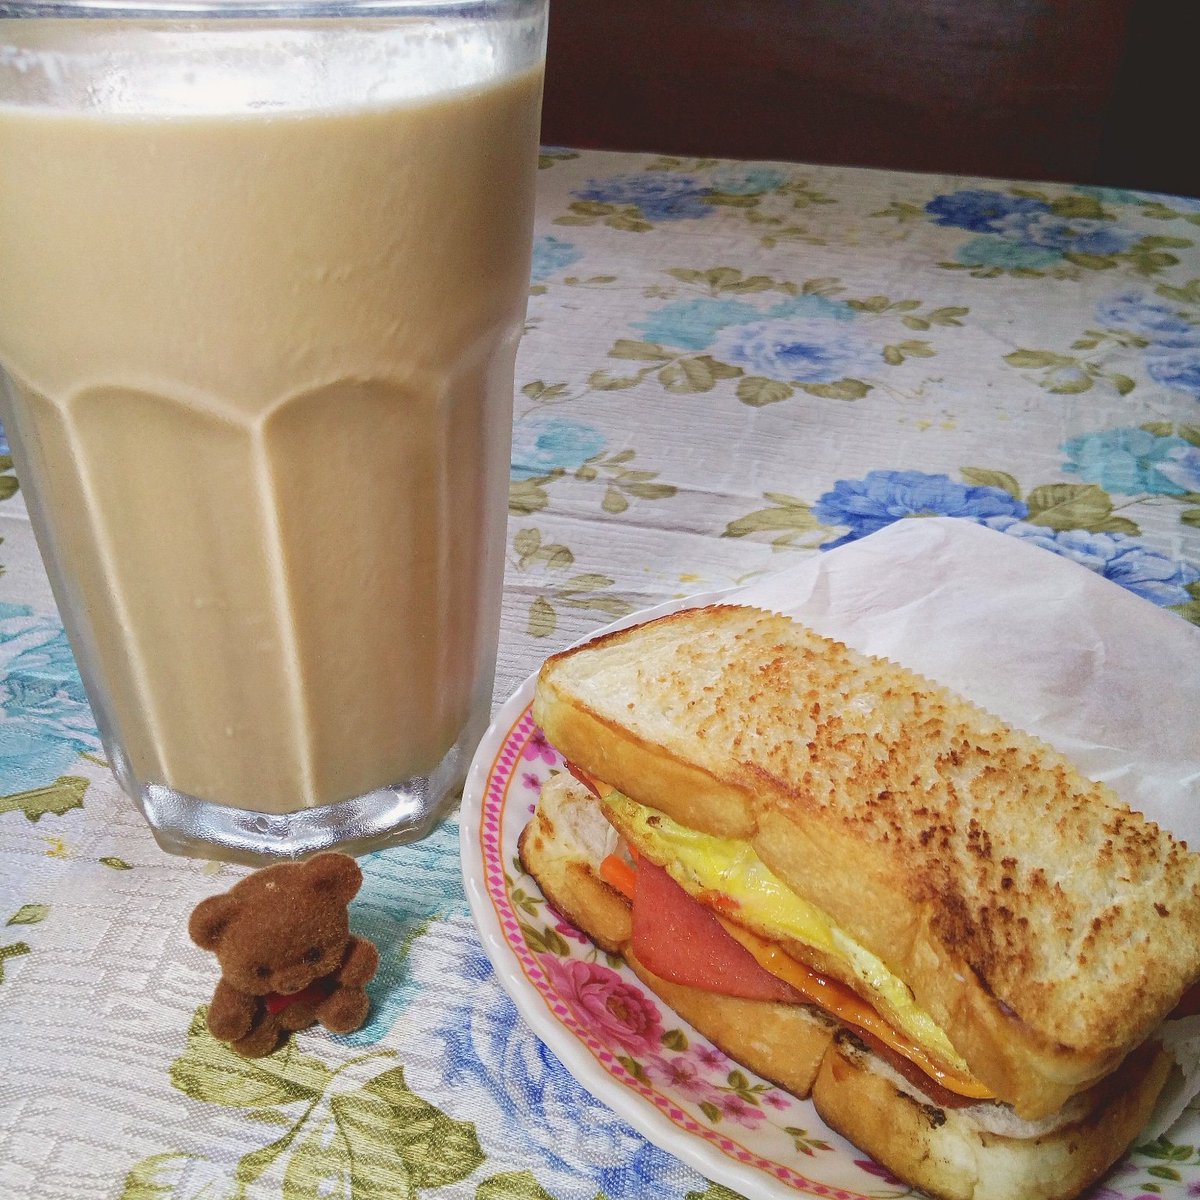 Today's lunch is #koreanstreettoast and #cinnamoncoffee. 🌸

#homemade #lunch #sandwich #toast #sandwich #cooking #yummy #delish